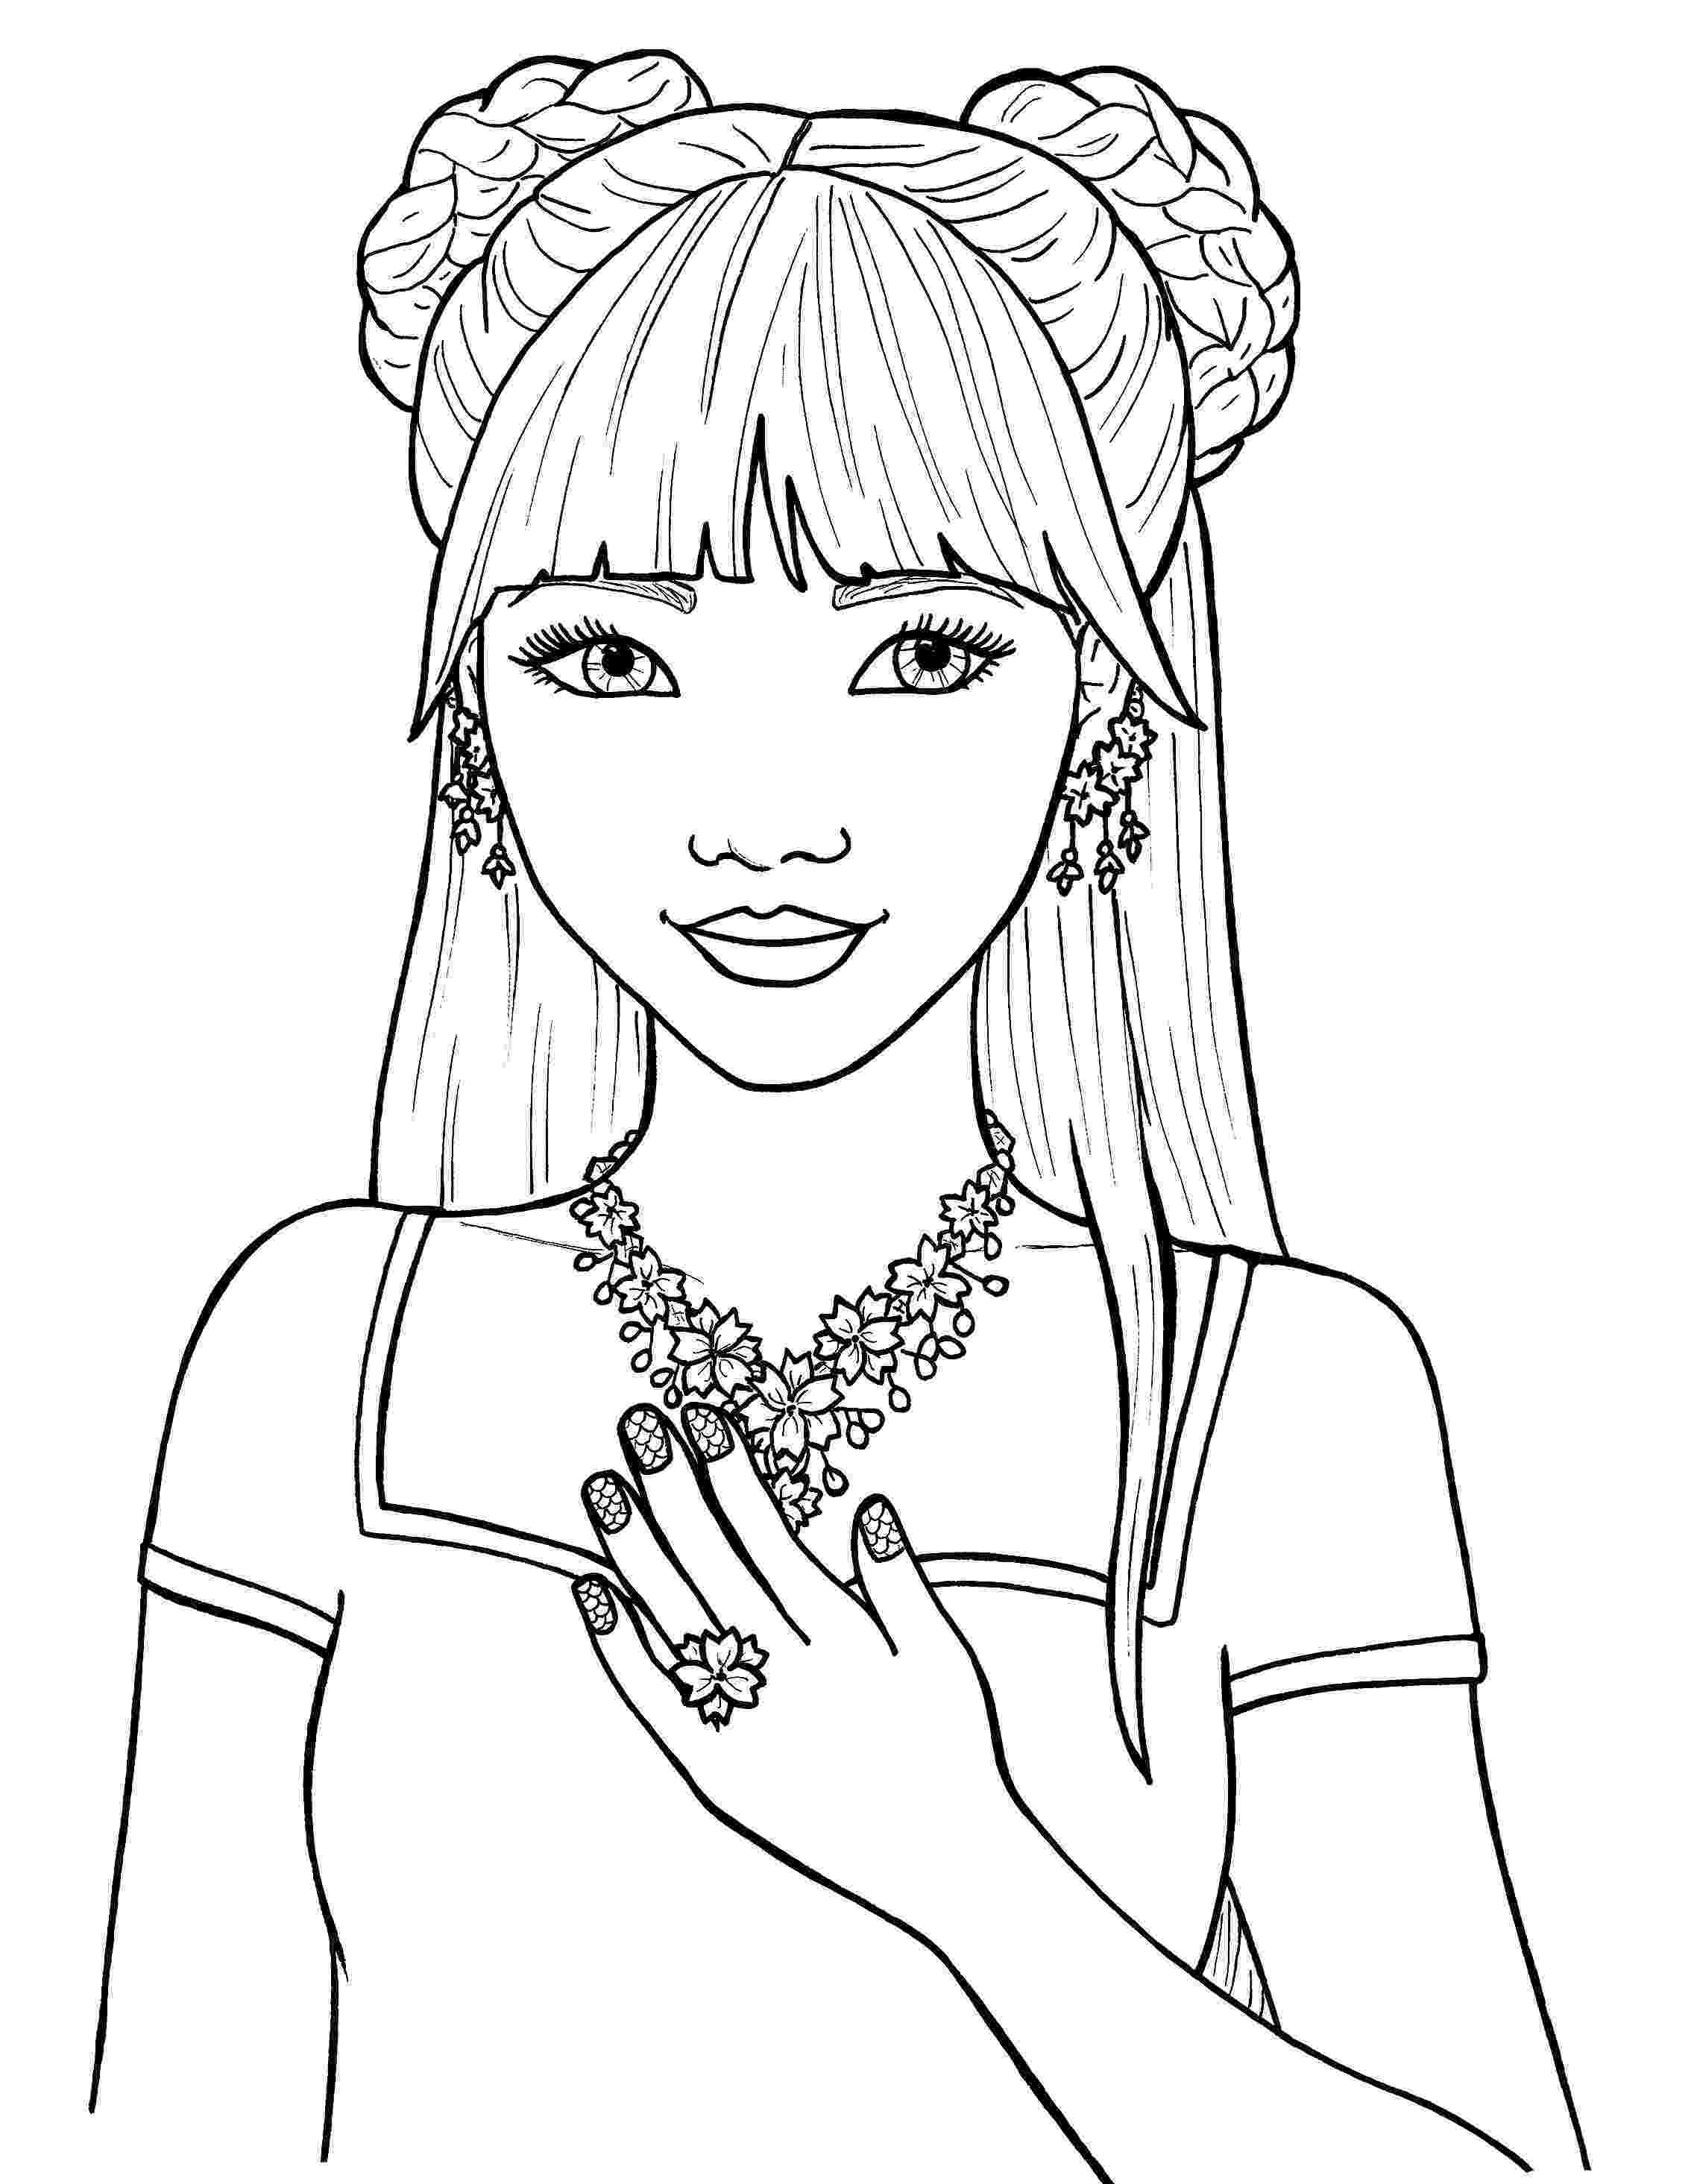 girl colouring pages cute girl coloring pages to download and print for free girl colouring pages 